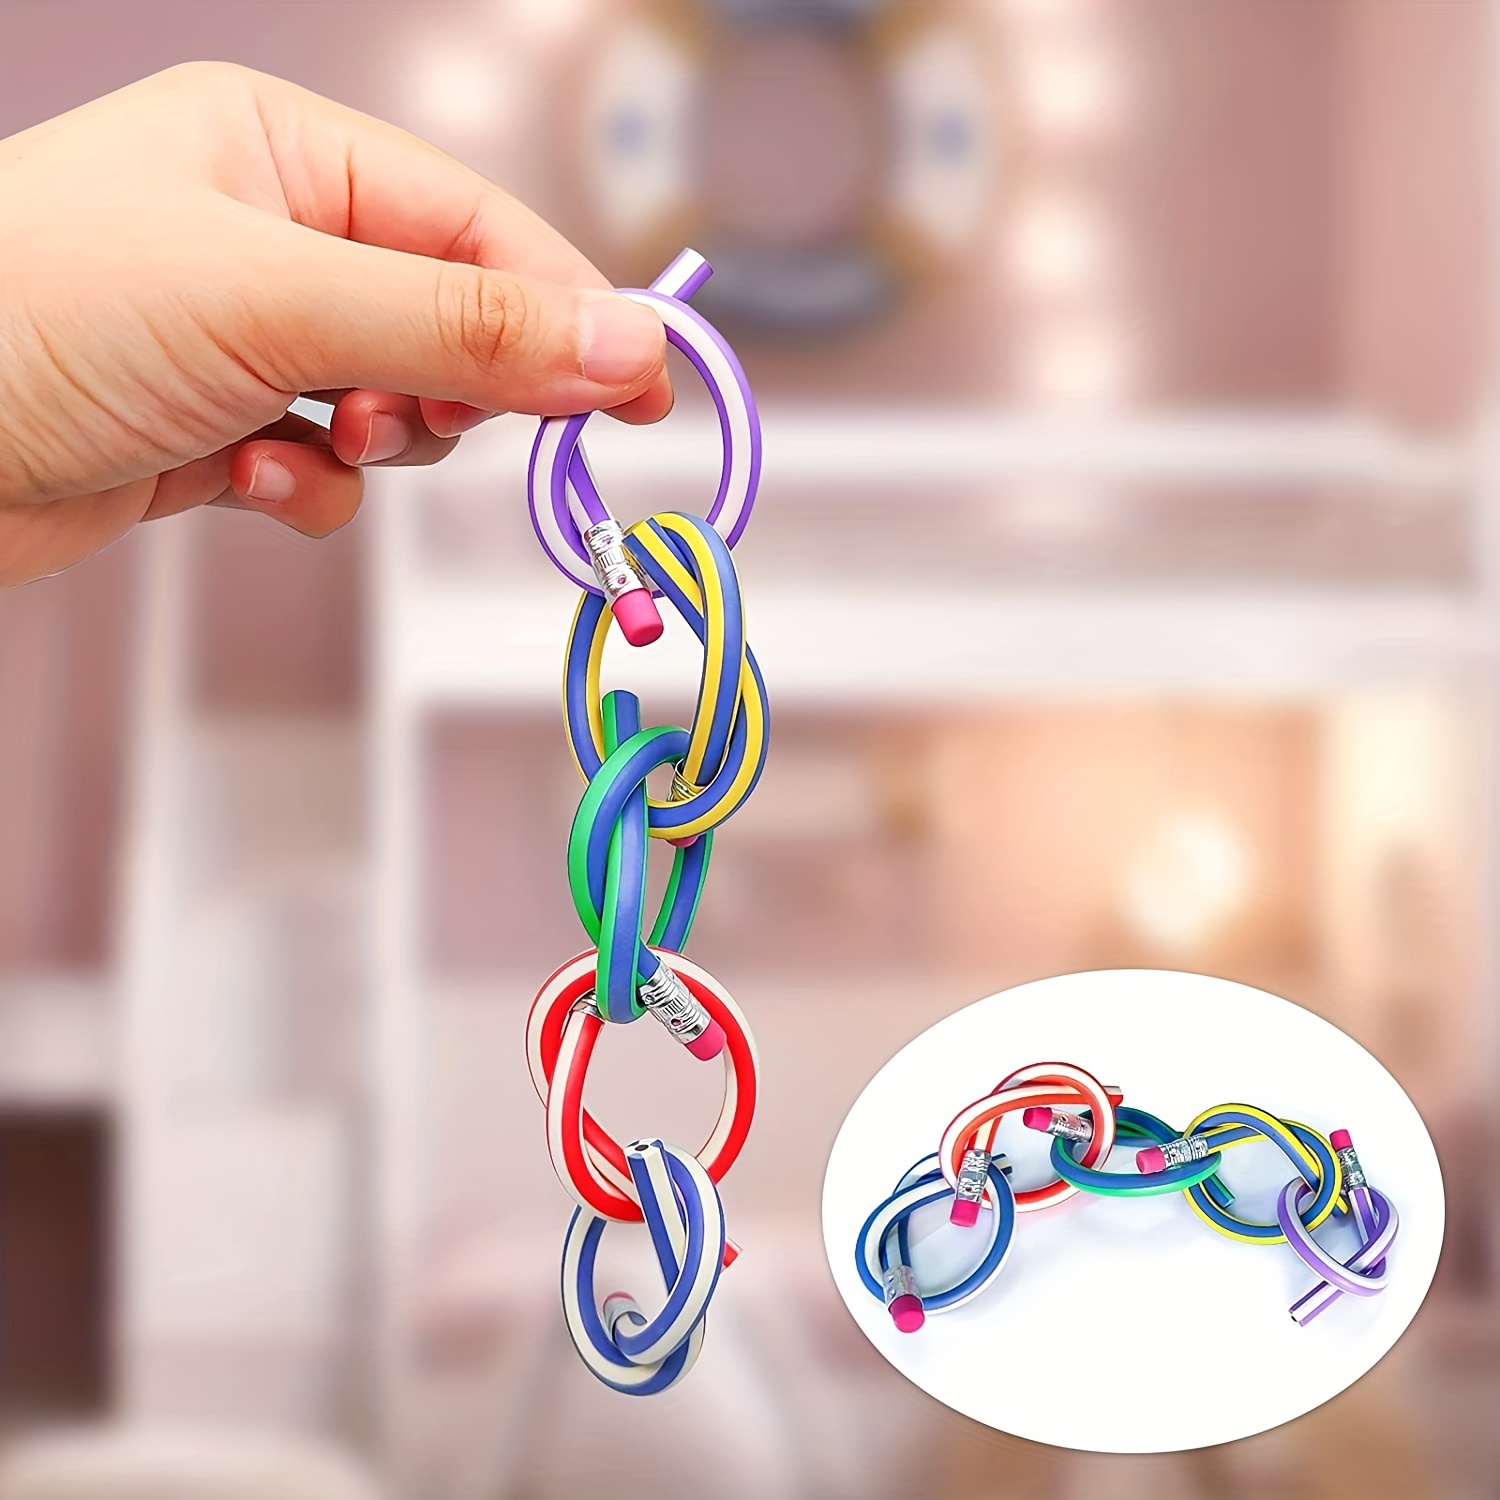 Generic 25 Pcs Soft Flexible Bendy Pencils Magic Bend Toys School  Stationary Equipment For Kids Party Bag Fillers Party Favor Supplies Funny  Gift Idea, Multicolored